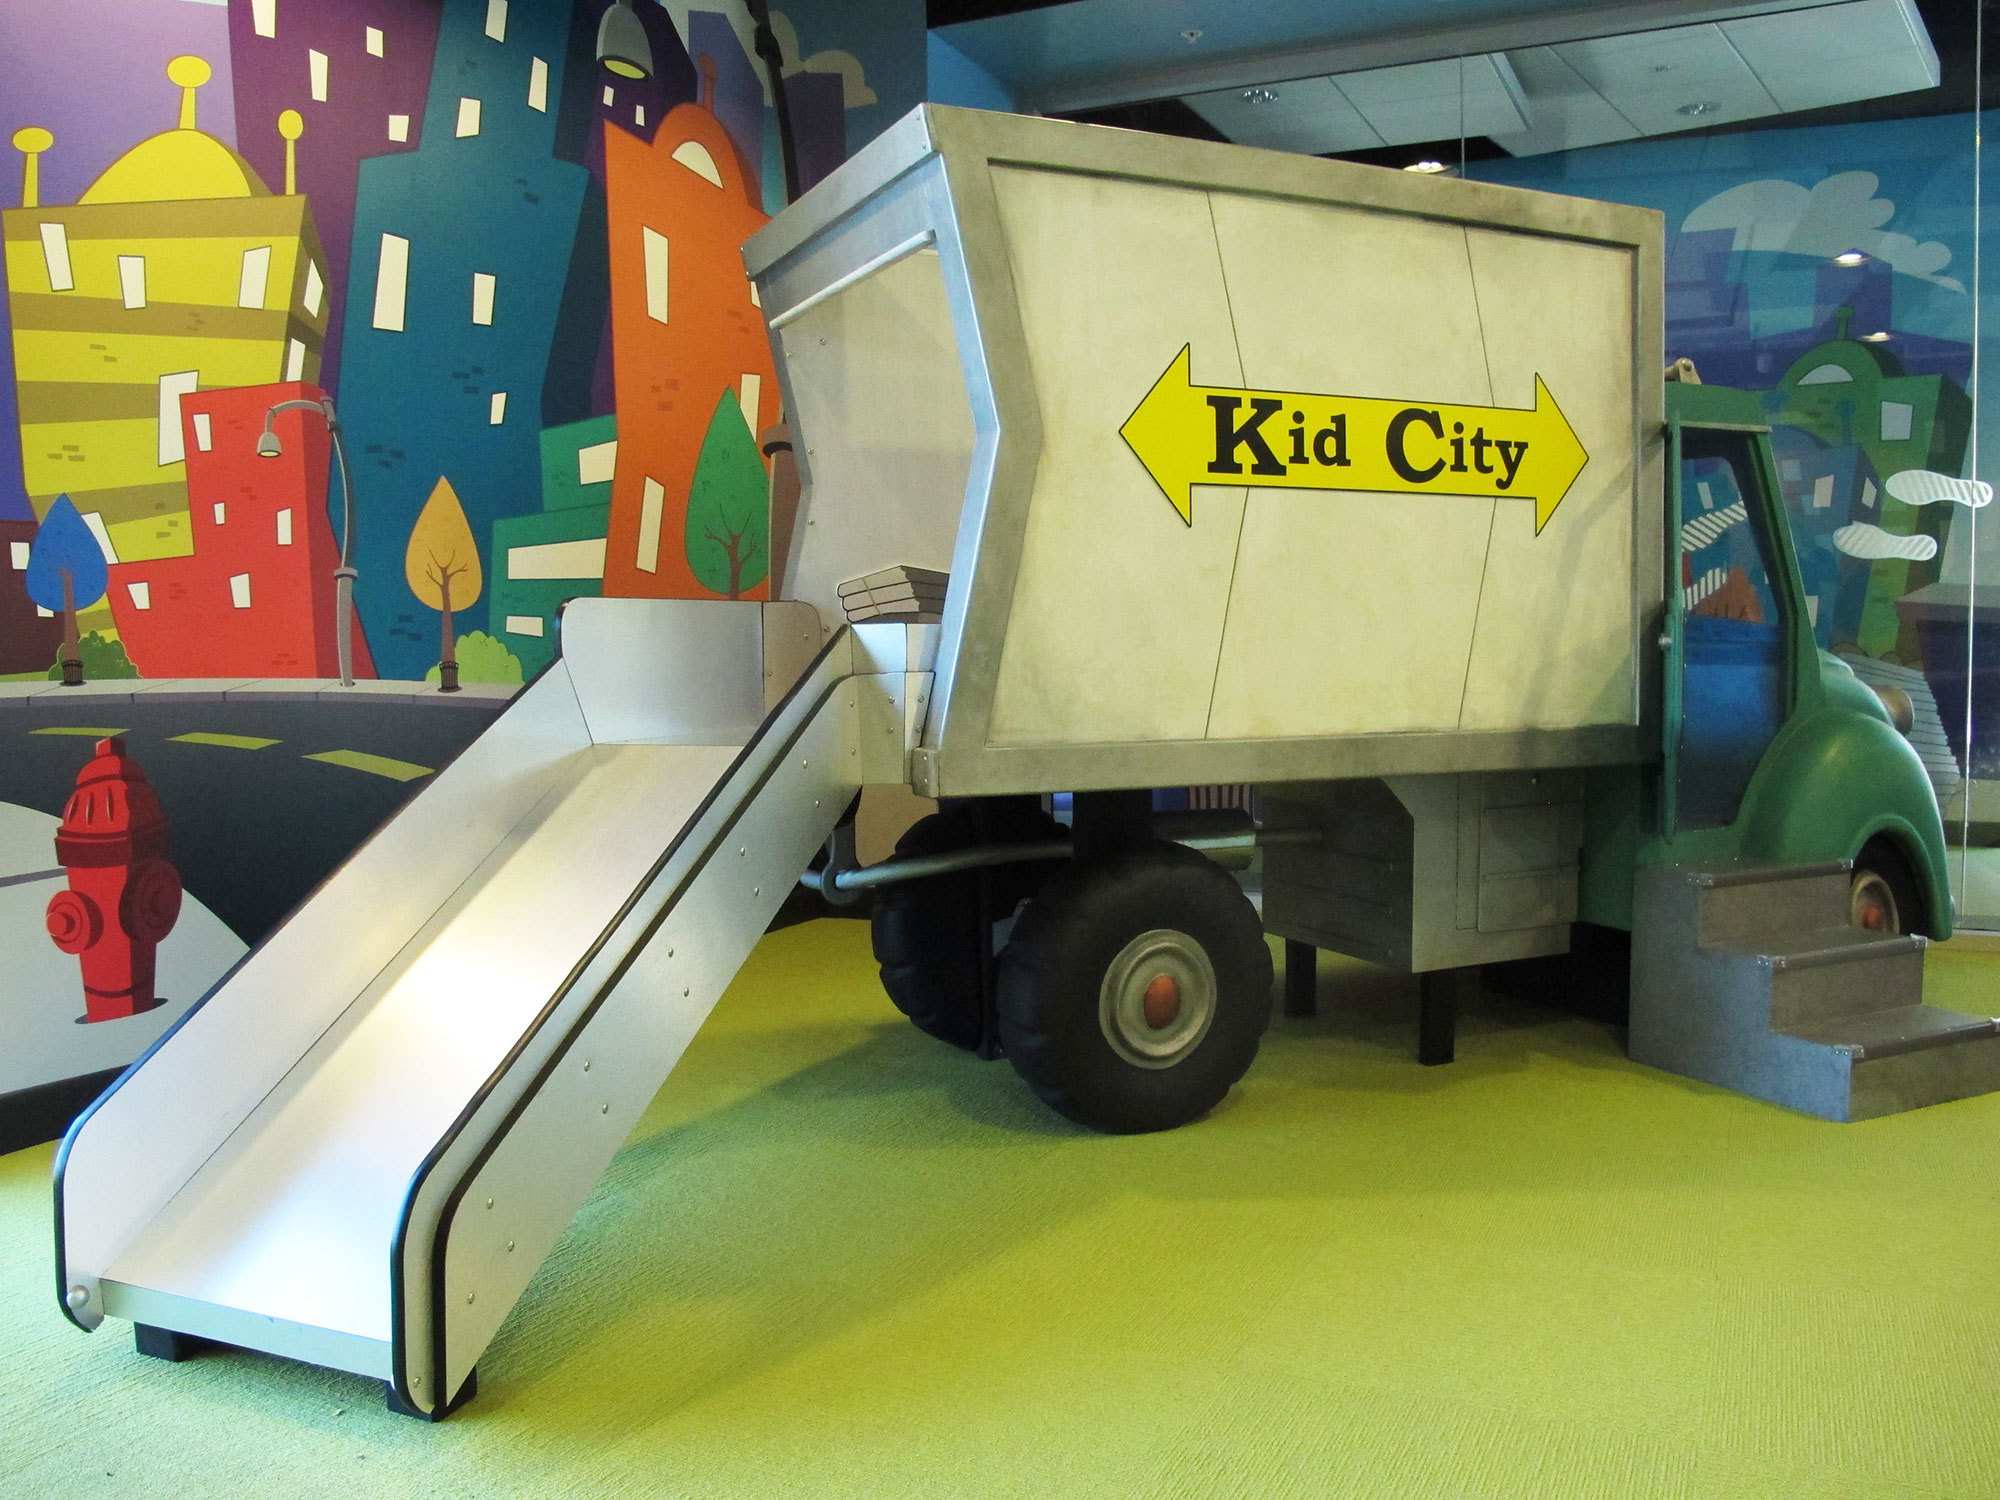 Kid City Big City Truck Themed Slide in Toon Town Themed Space at Mount of Olives Church